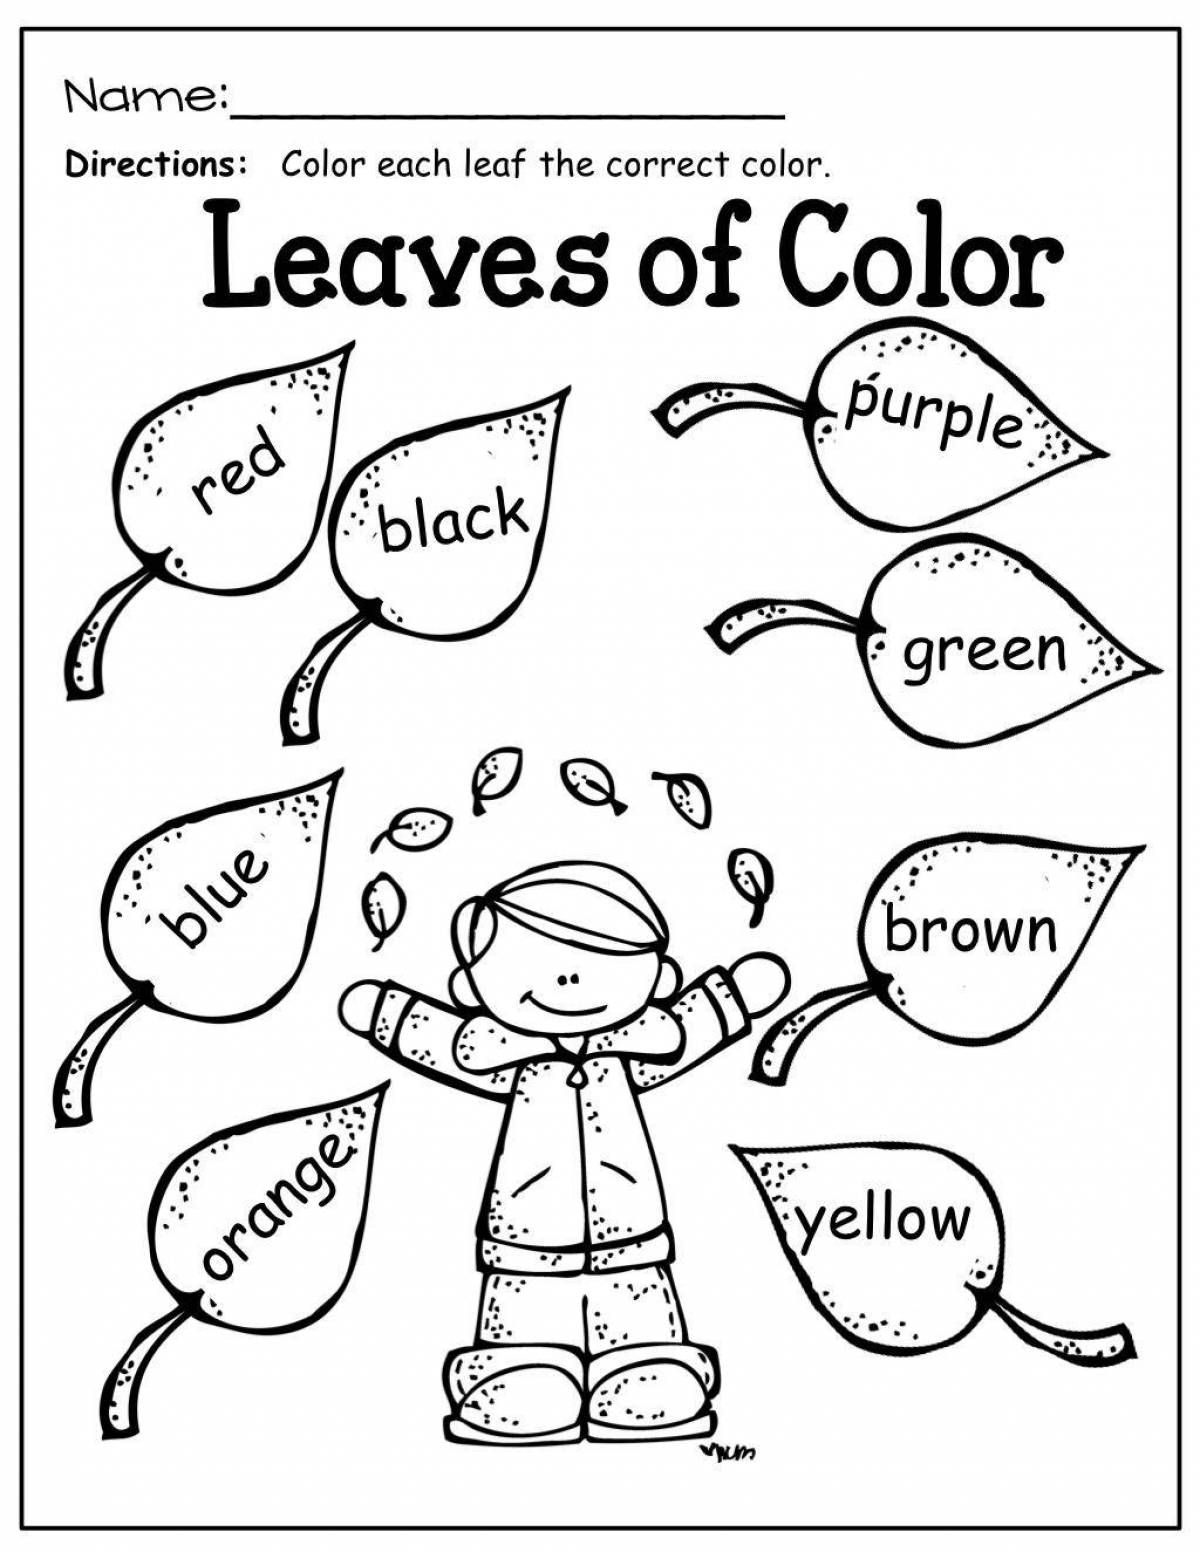 Joyful coloring pages in english for kids